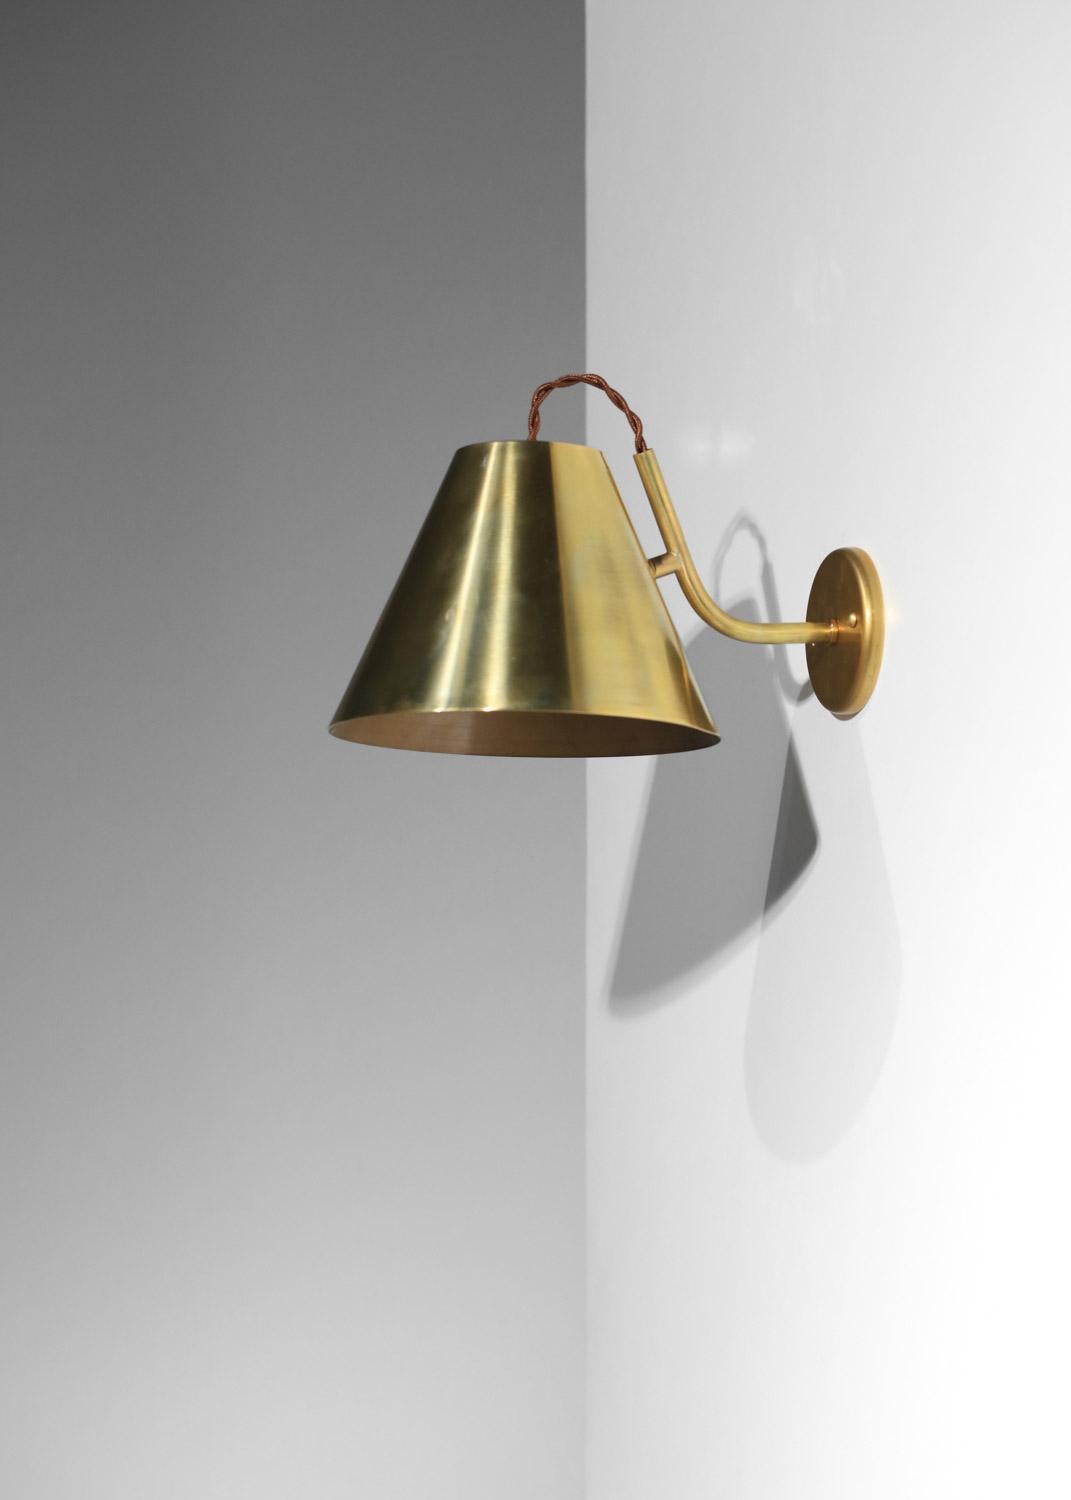 The entire Danke Galerie team is delighted to present this new pair of wall lights, designed in our studio to enrich our range of modern and timeless lighting. Particular care has been taken with the details of the finishes and the patina of the